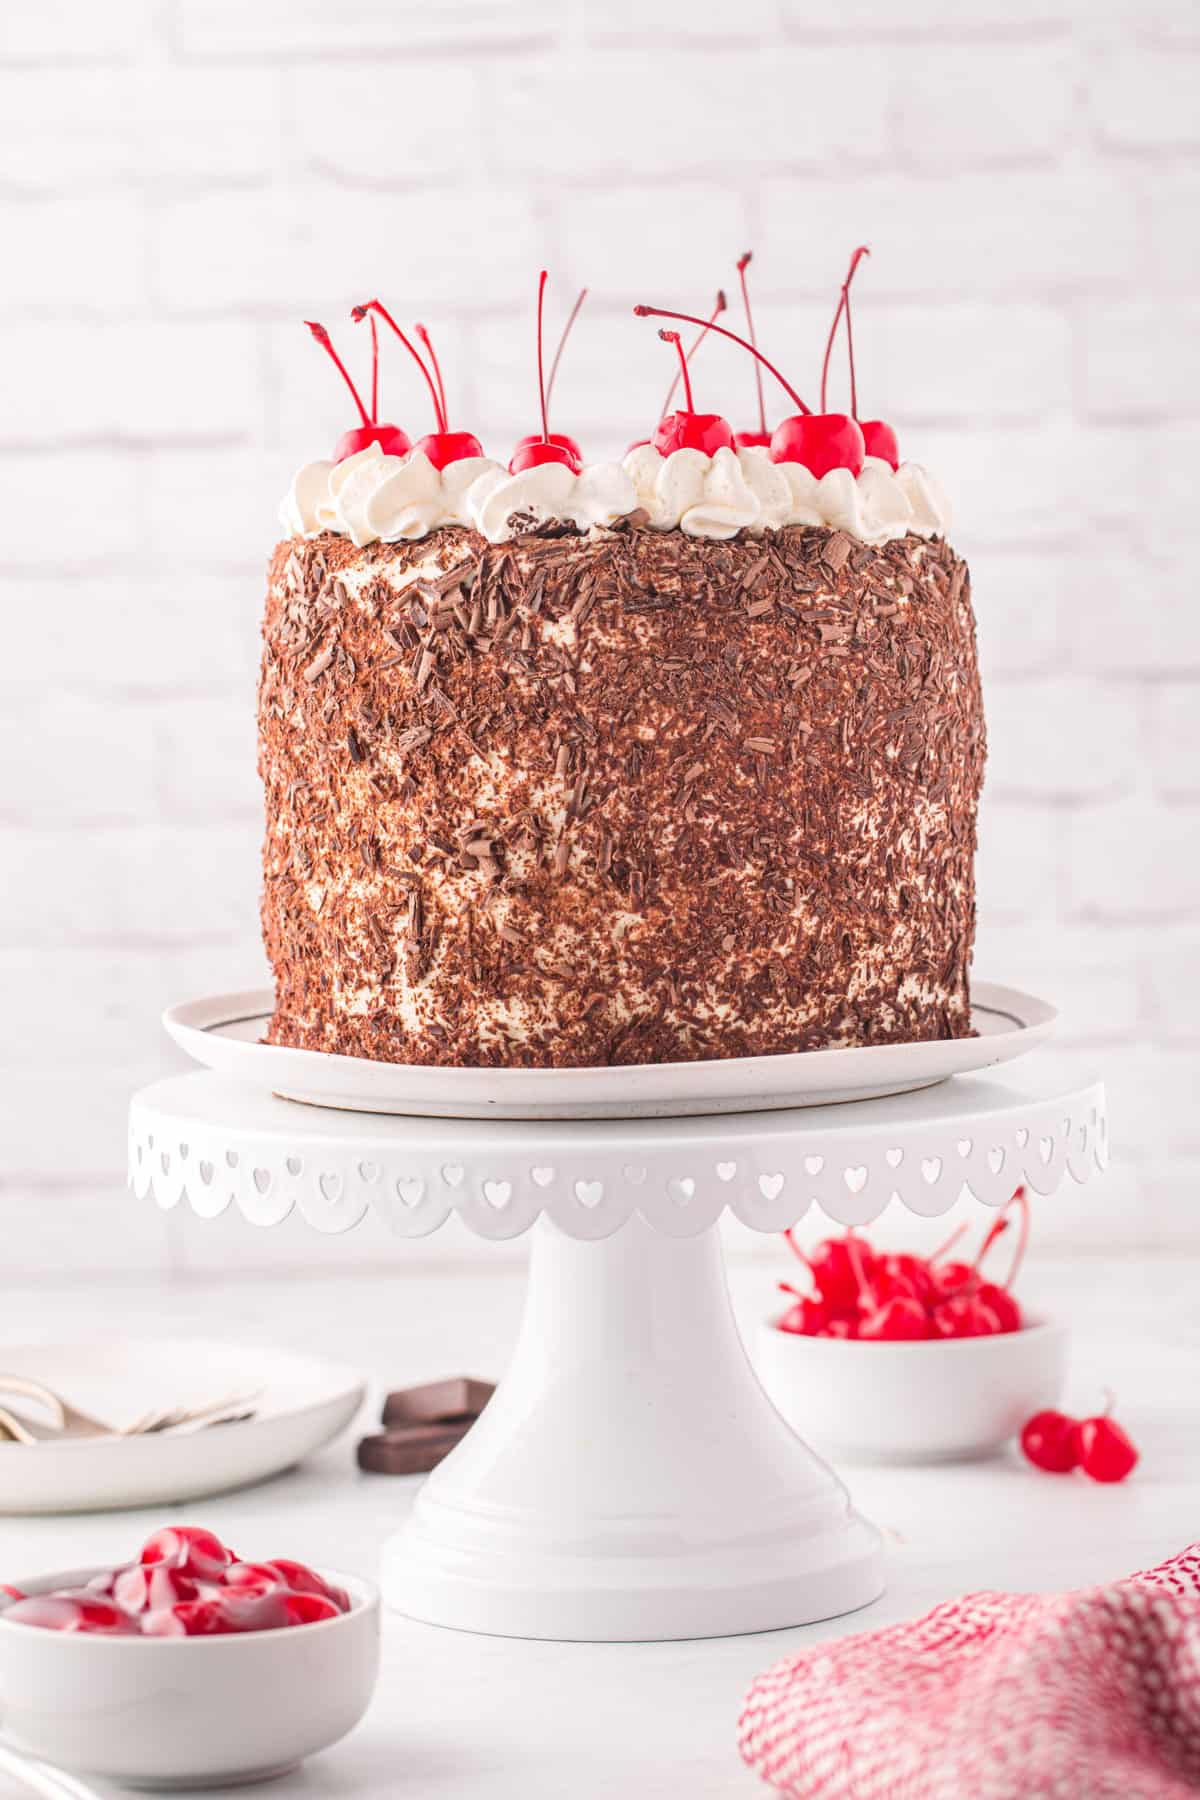 A white cake stand is holding a black forest cake.